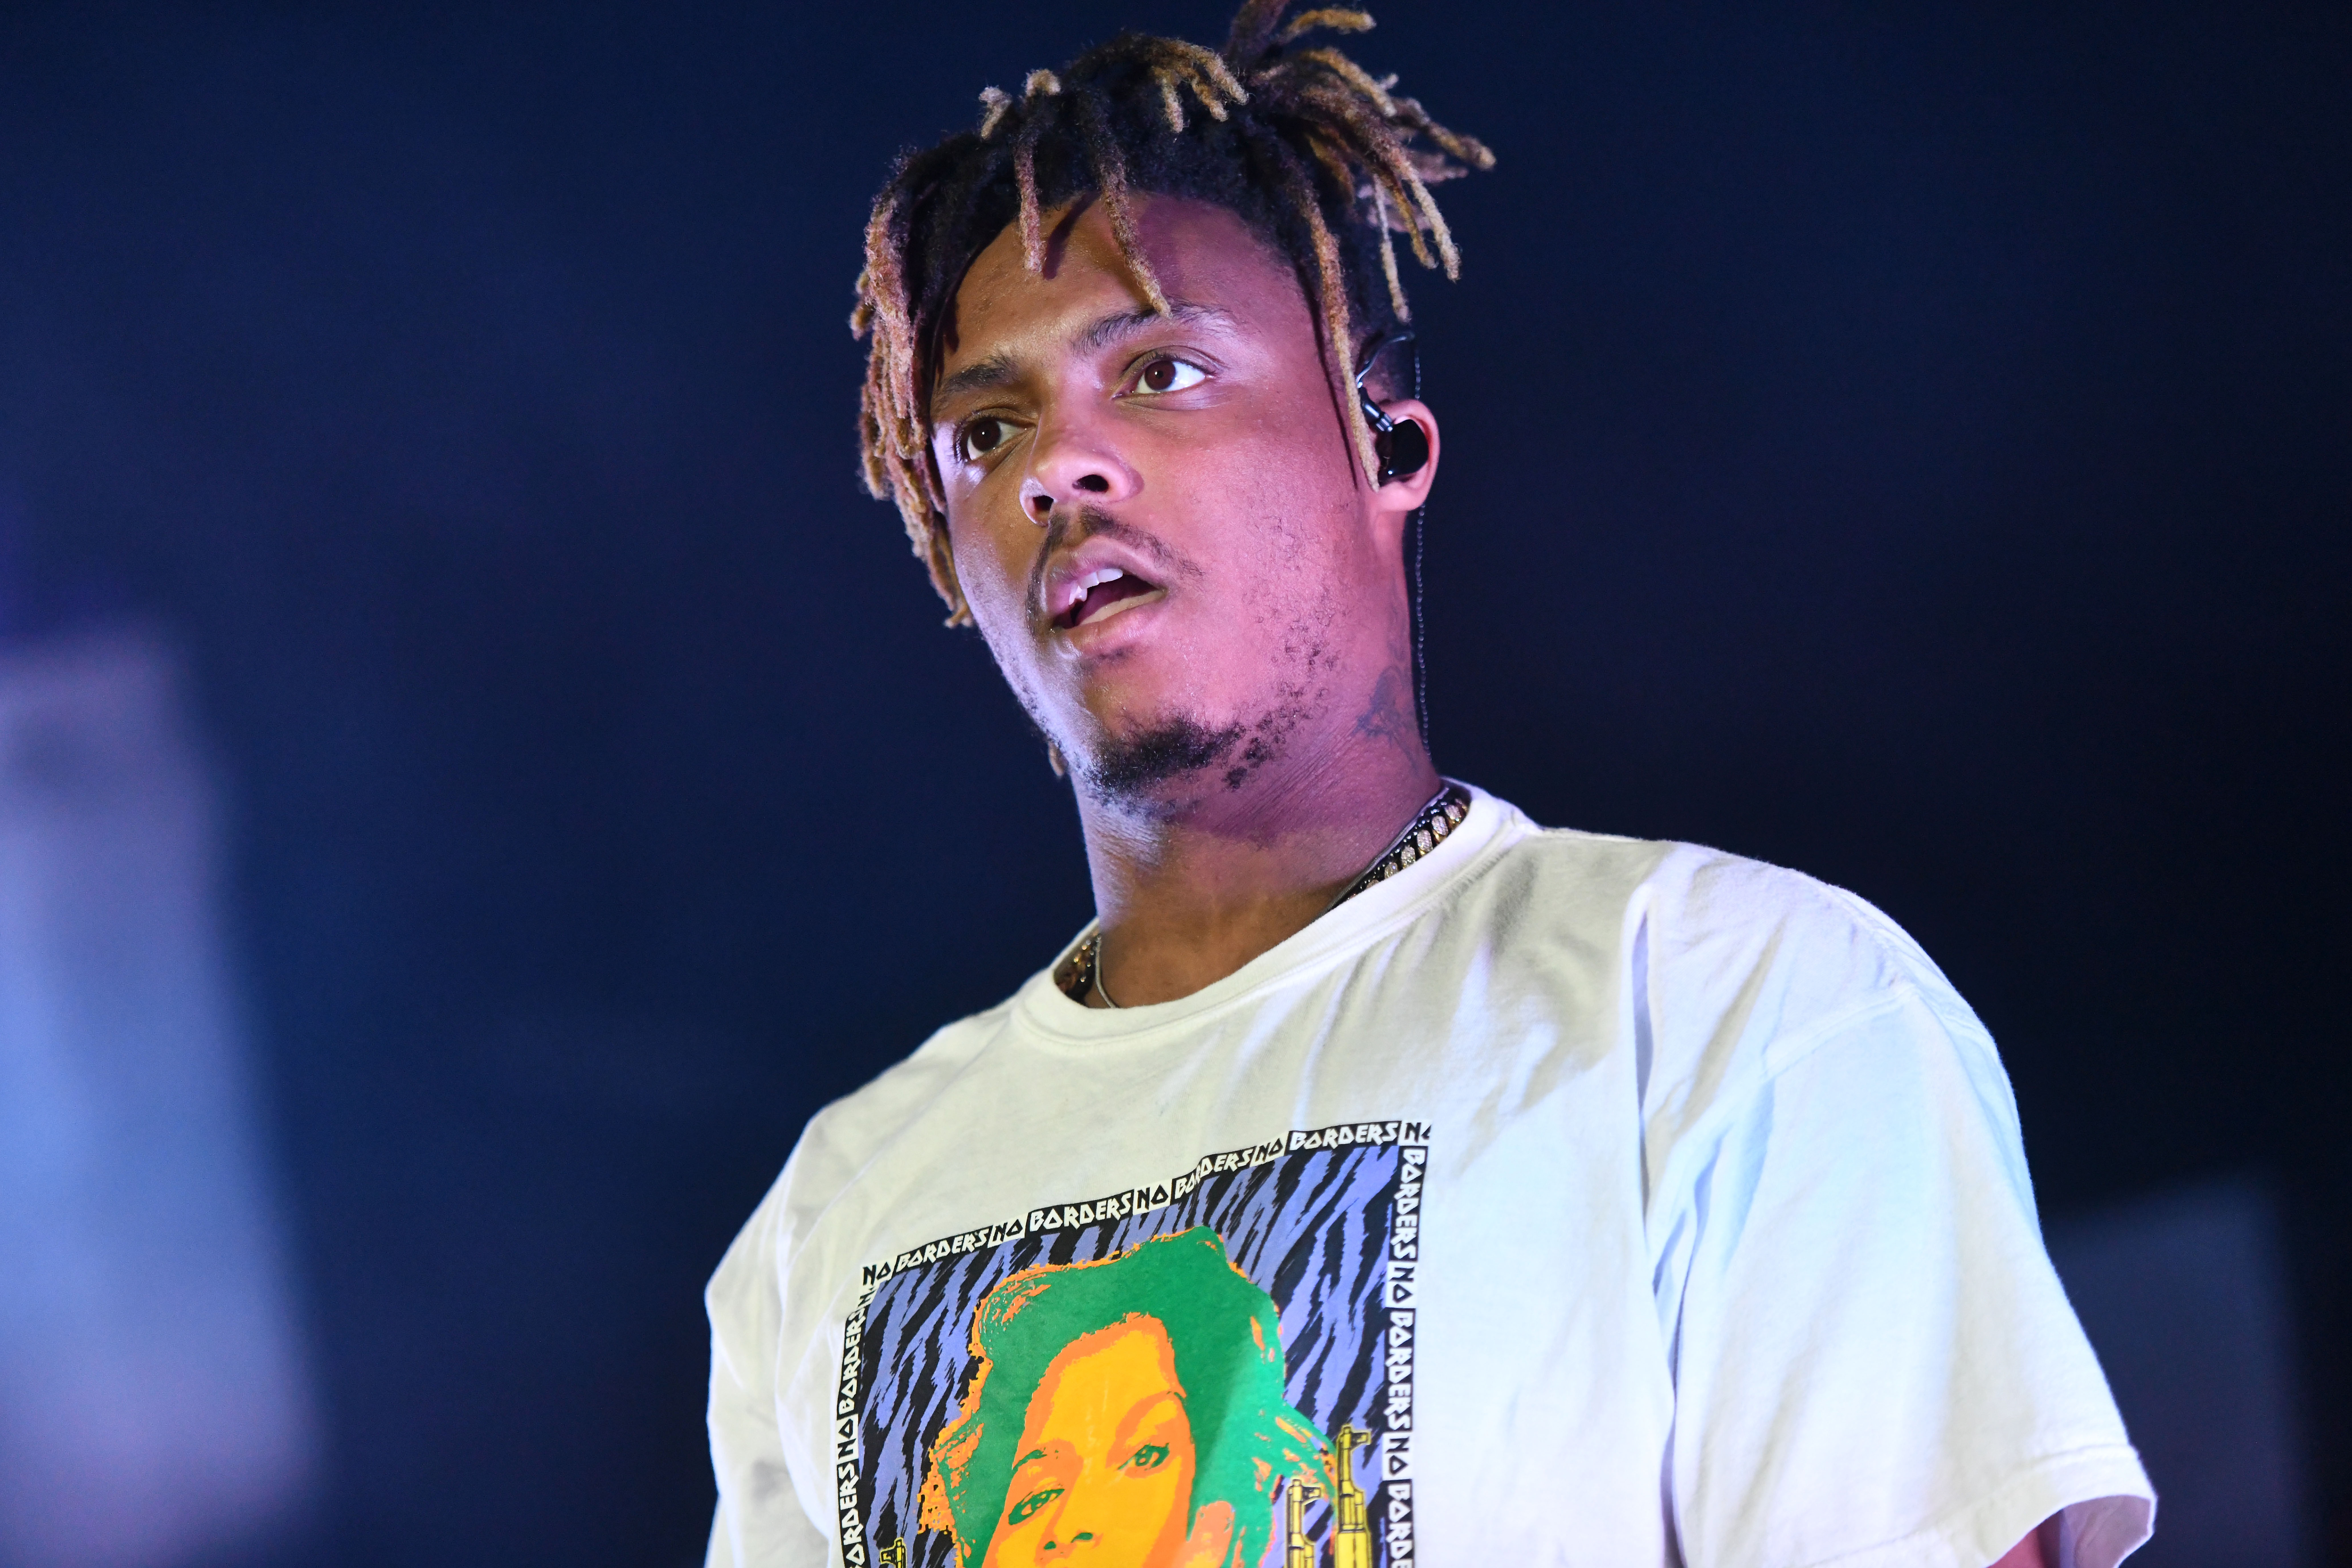 Juice WRLD performing onstage during the 'Death Race for Love' tour at The Greek Theater in Los Angeles, California | Photo: Getty Images